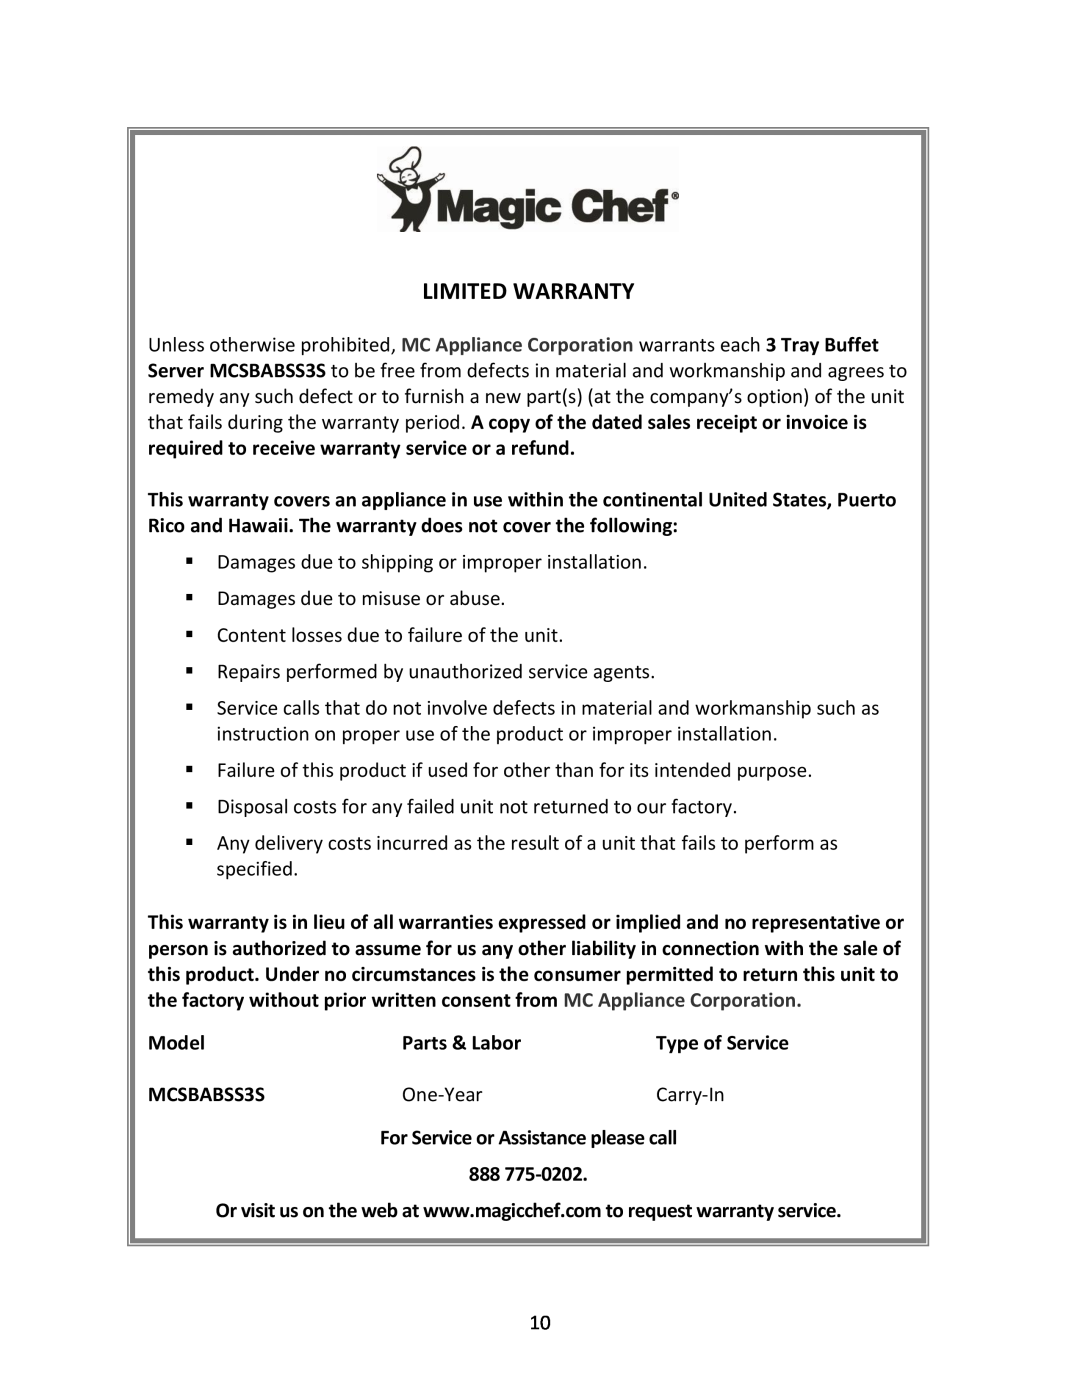 Magic Chef MCSBABSS3S instruction manual Model, Parts & Labor, For Service or Assistance please call, Limited Warranty 